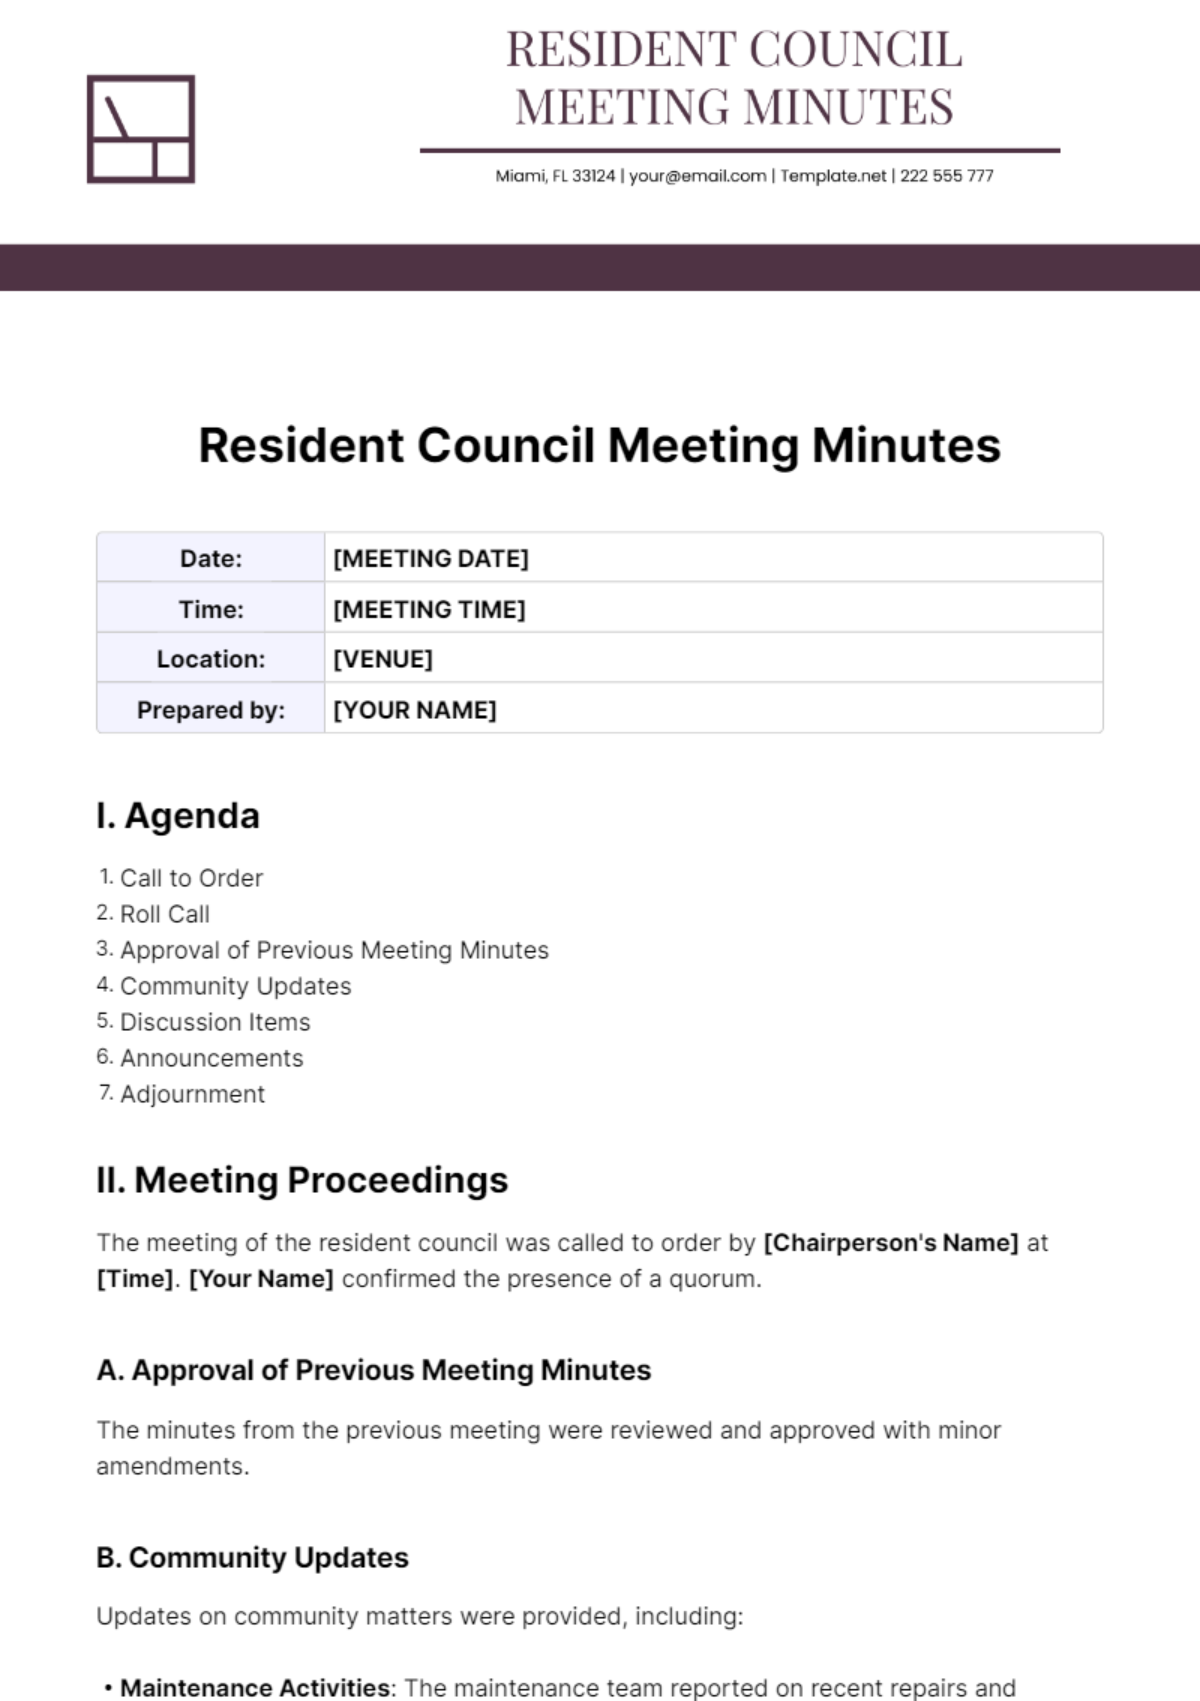 Free Resident Council Meeting Minutes Template